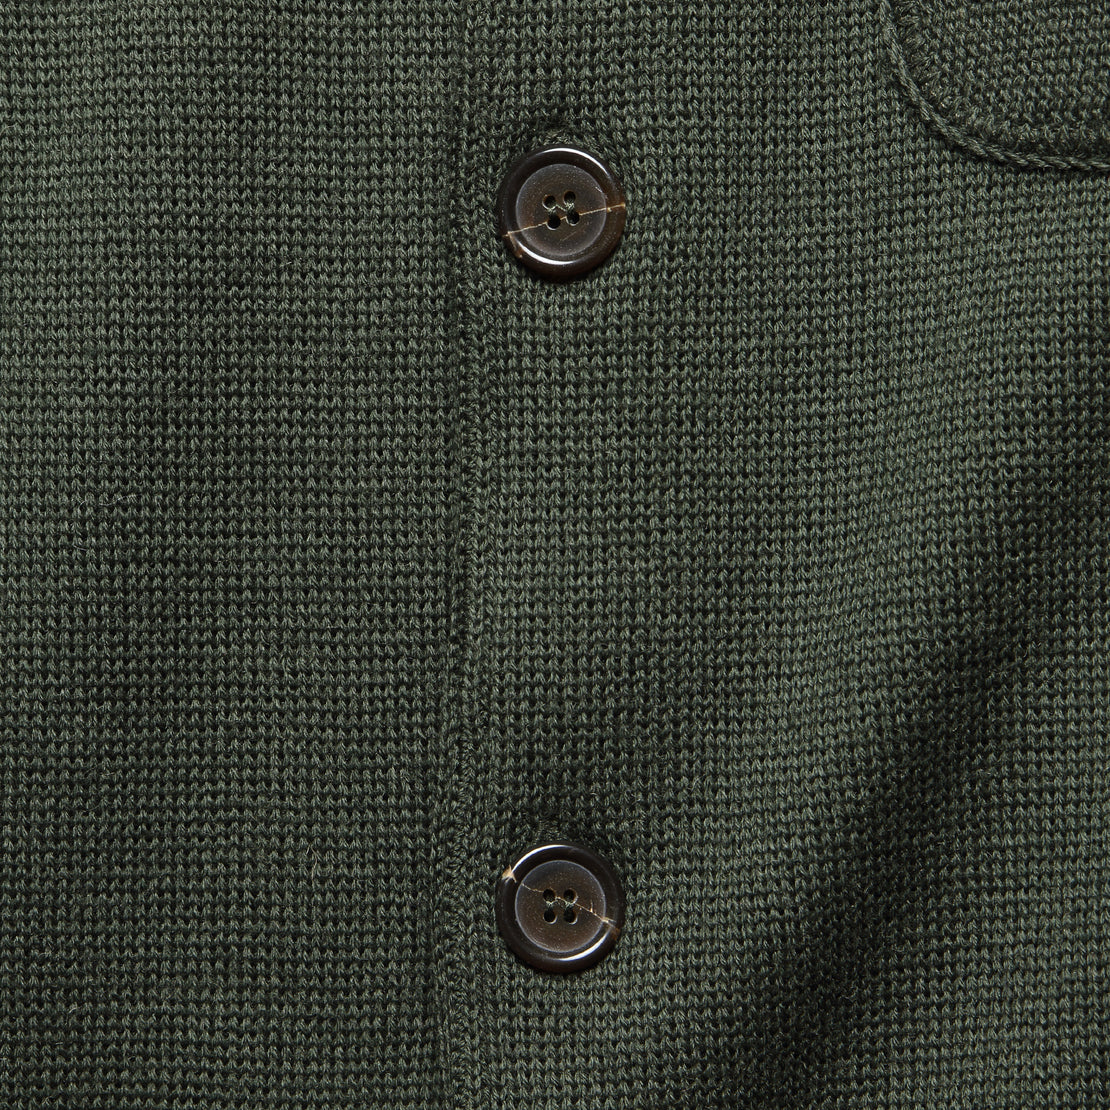 Knit Work Jacket - Olive - Universal Works - STAG Provisions - Tops - Sweater